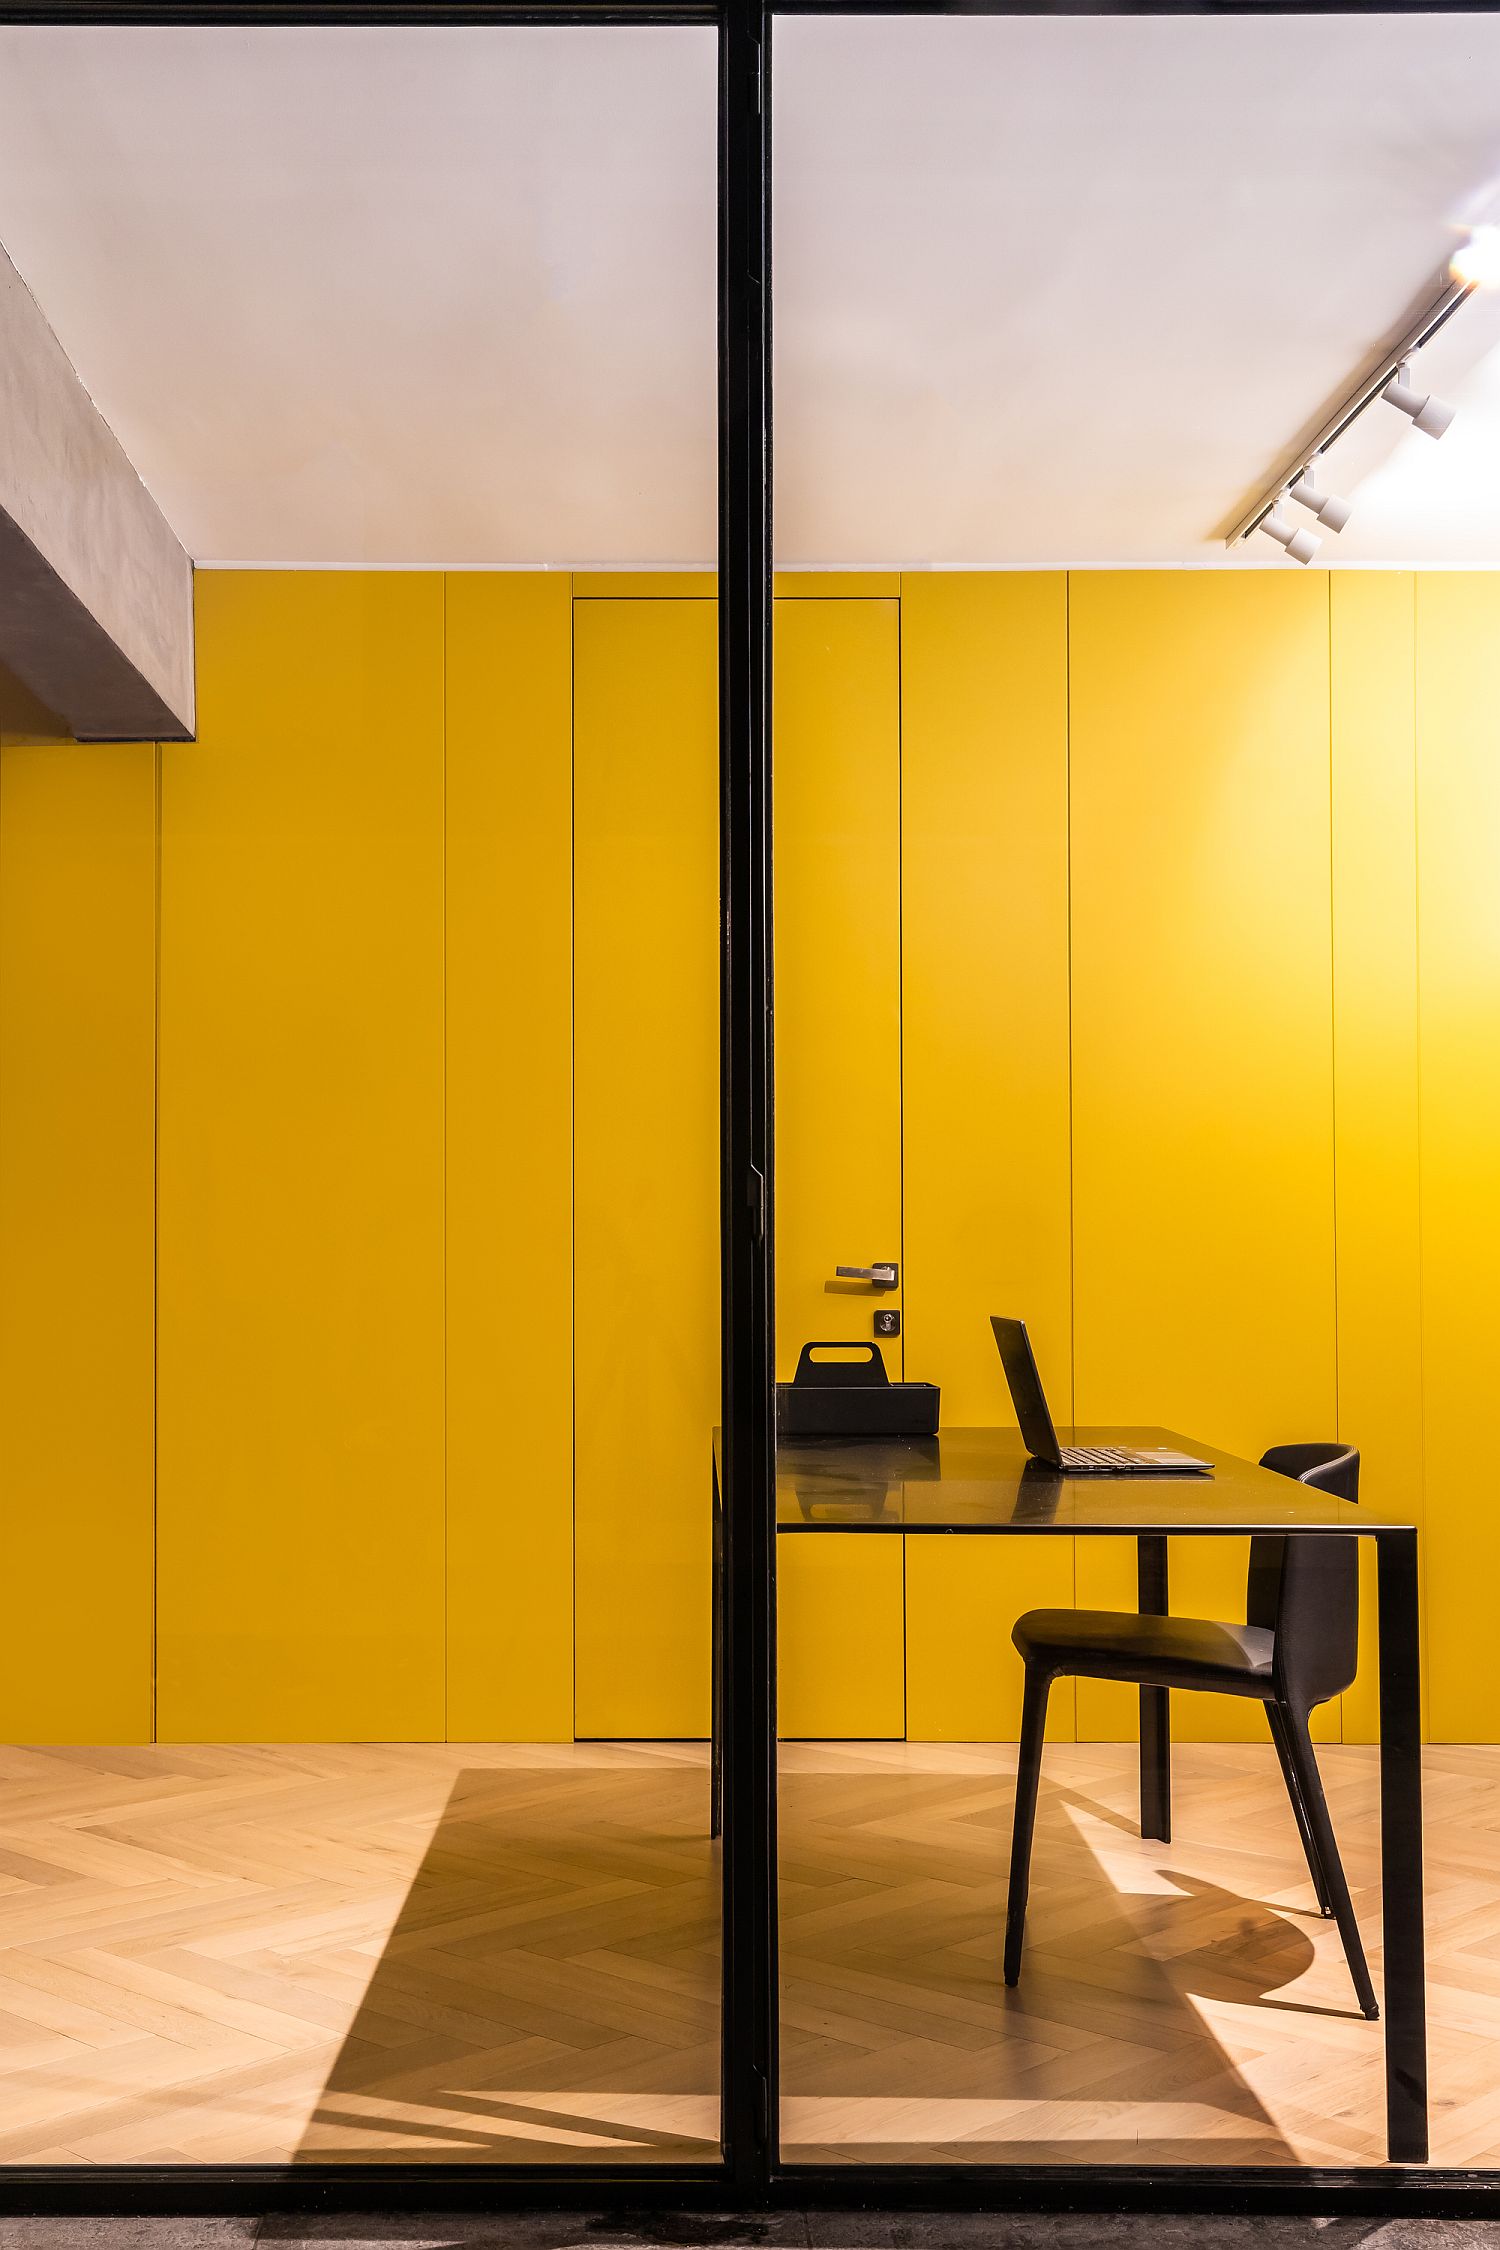 Custom mustard yellow wall in wood hides bathrooms and bedrooms behnd it